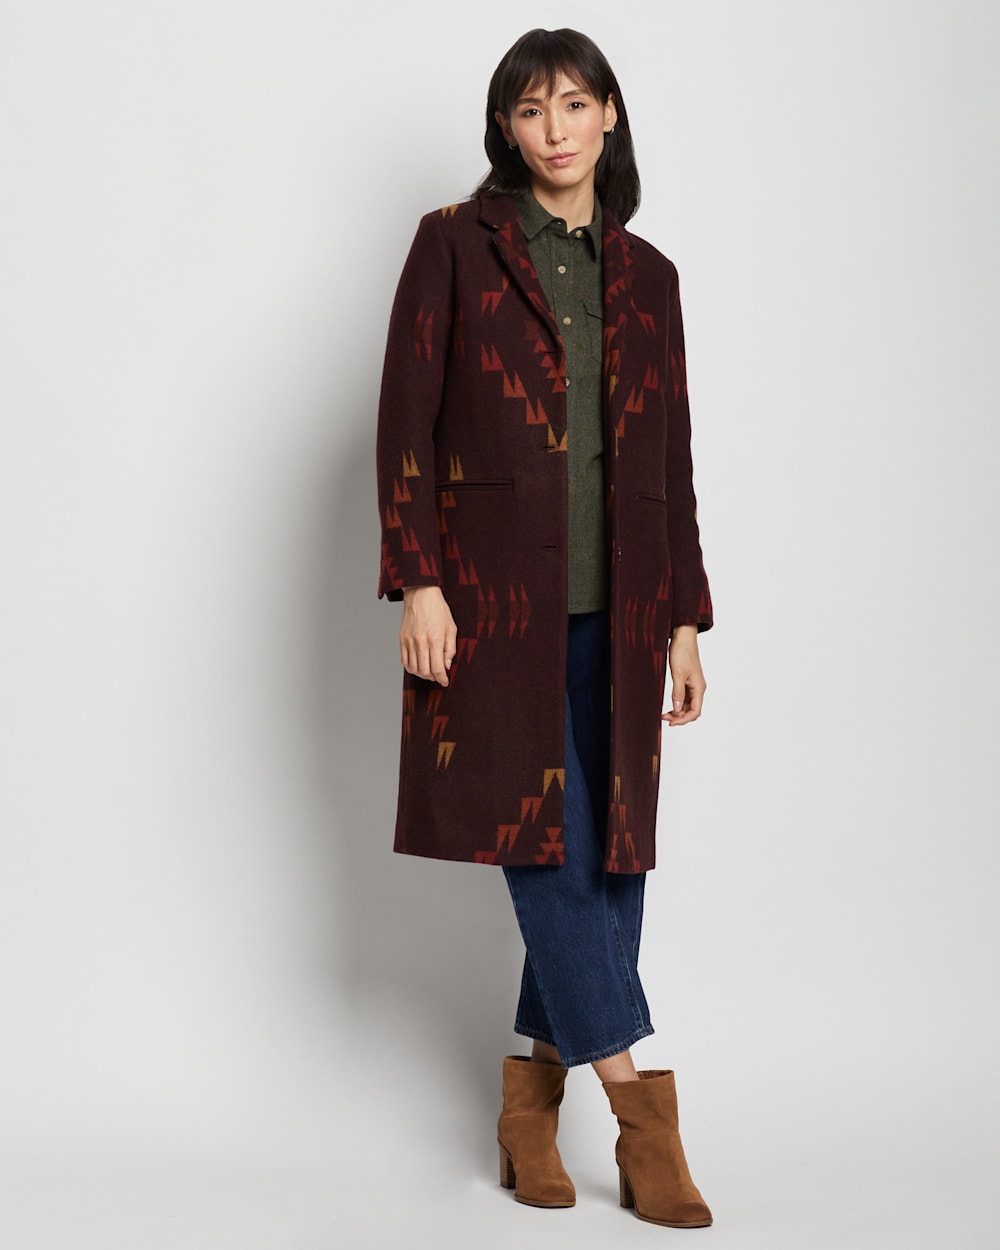 ALTERNATE VIEW OF WOMEN'S JACKSONVILLE WOOL COAT IN CABERNET MISSION TRAILS image number 5